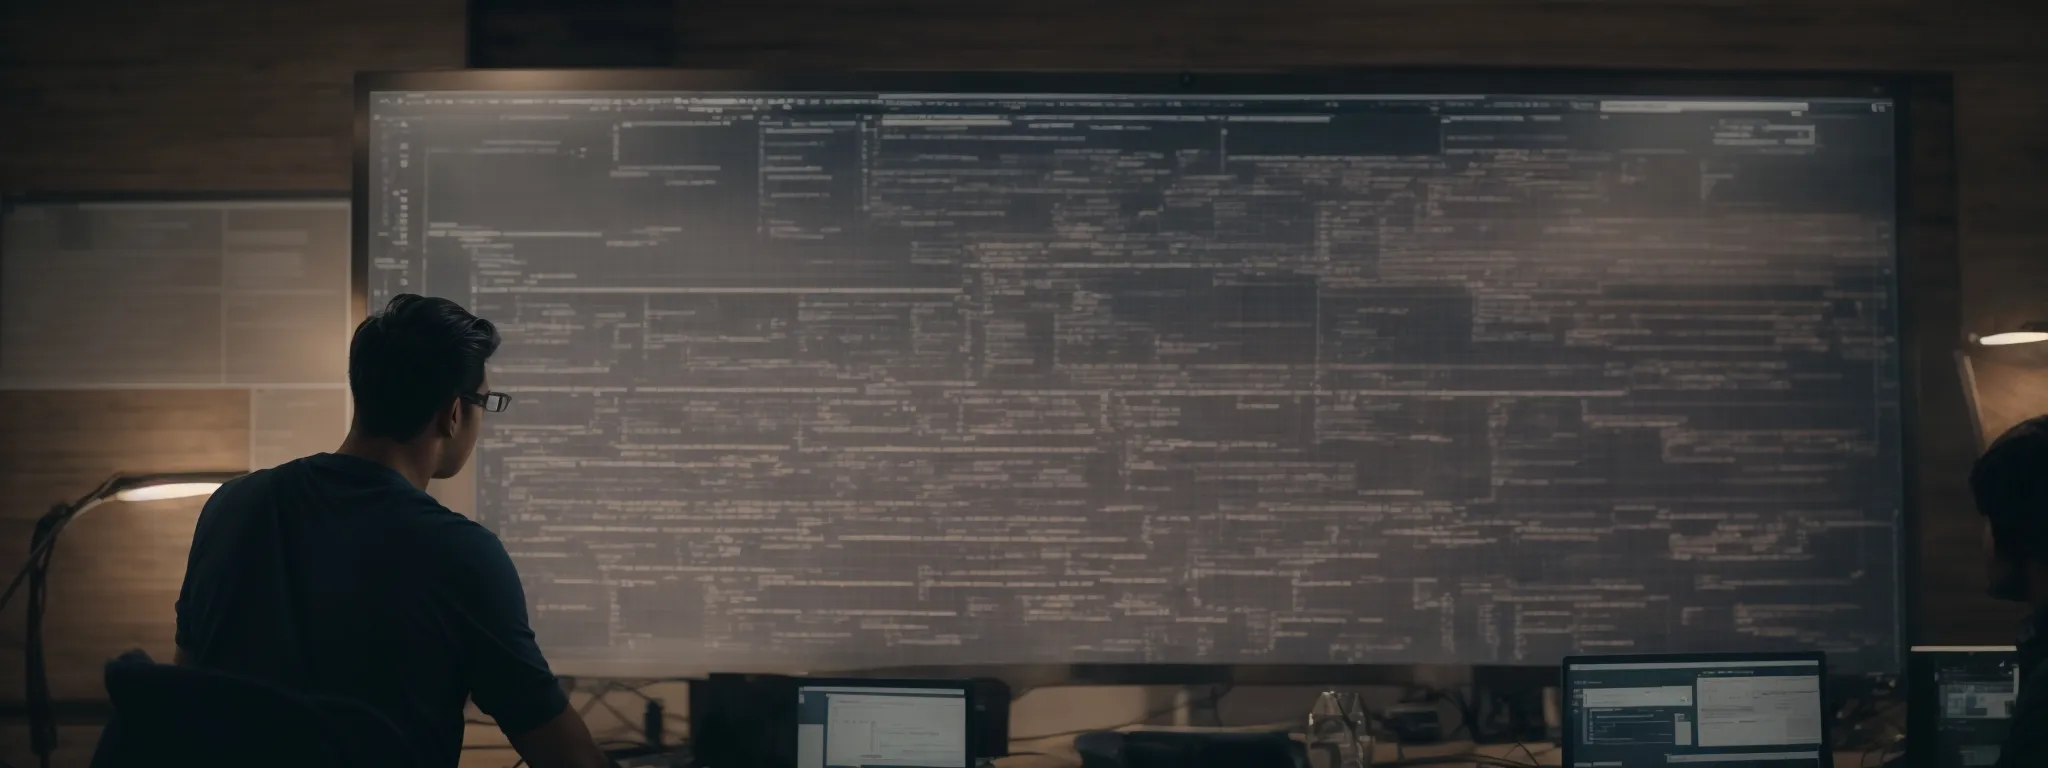 a web developer analyzes a sprawling flowchart on a large monitor, optimizing the website architecture.